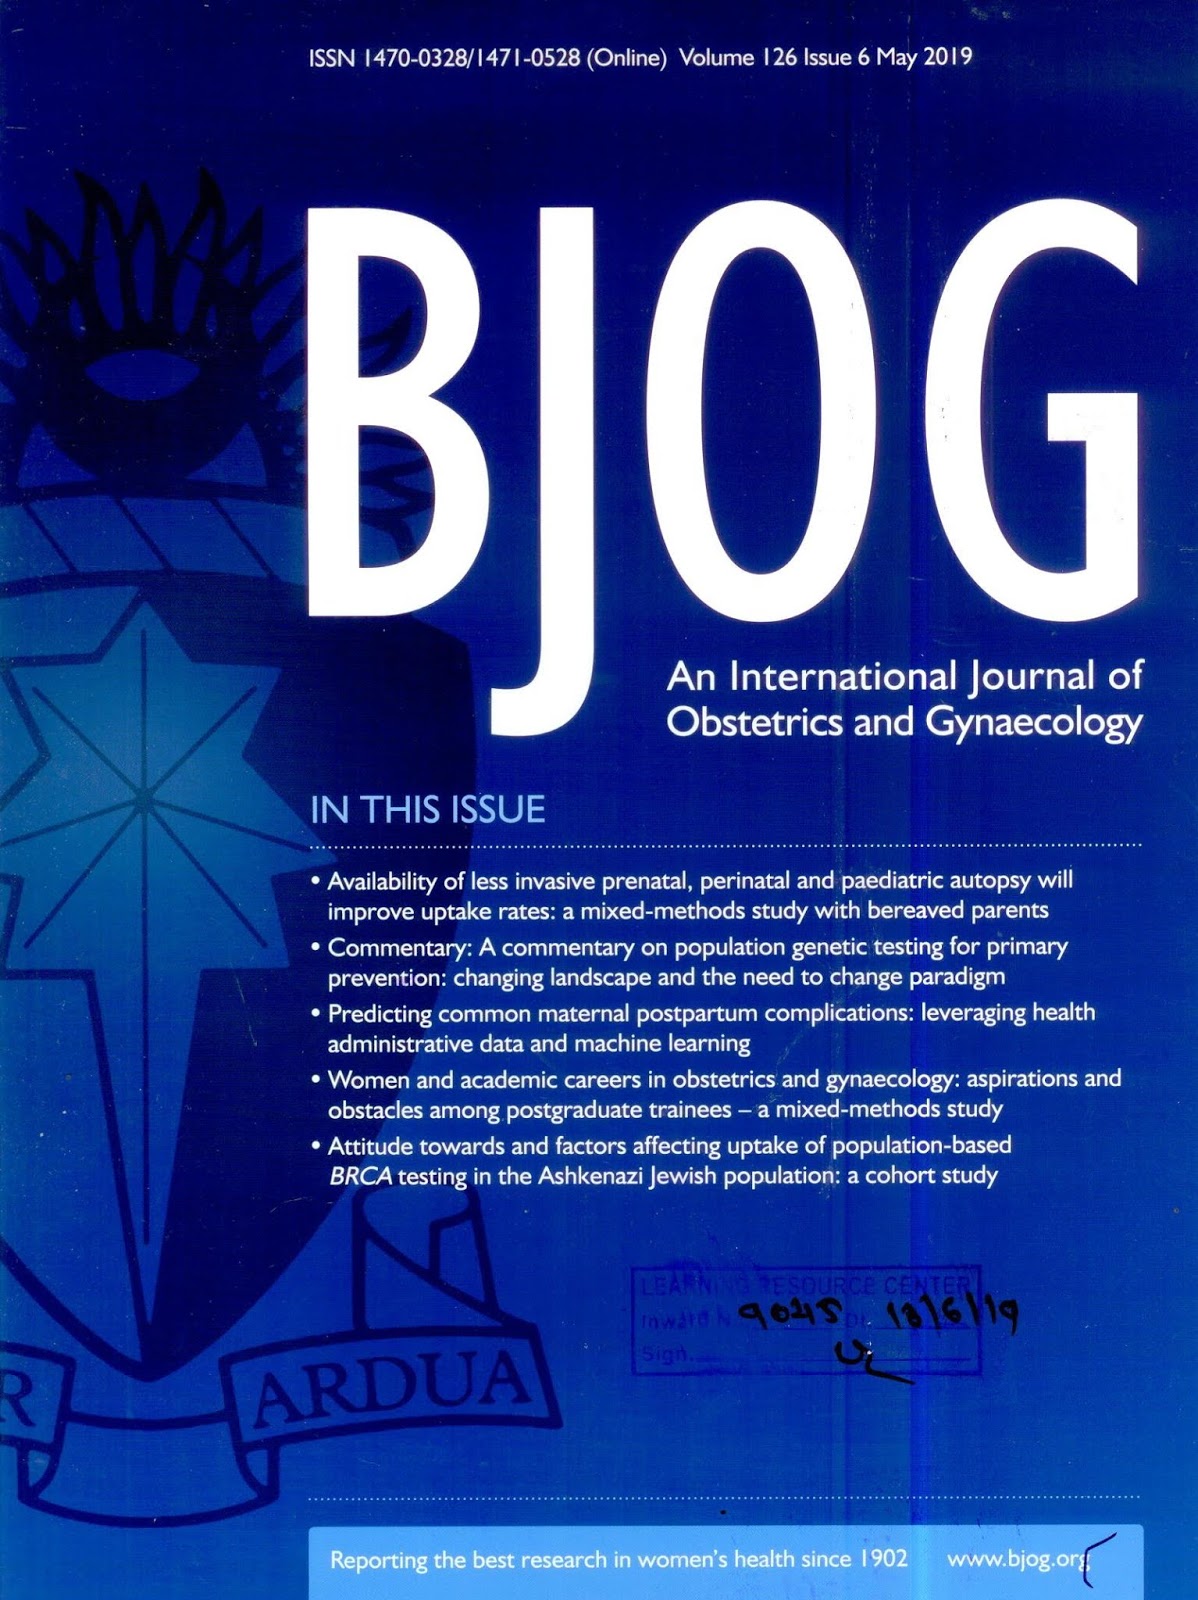 https://obgyn.onlinelibrary.wiley.com/toc/14710528/2019/126/6